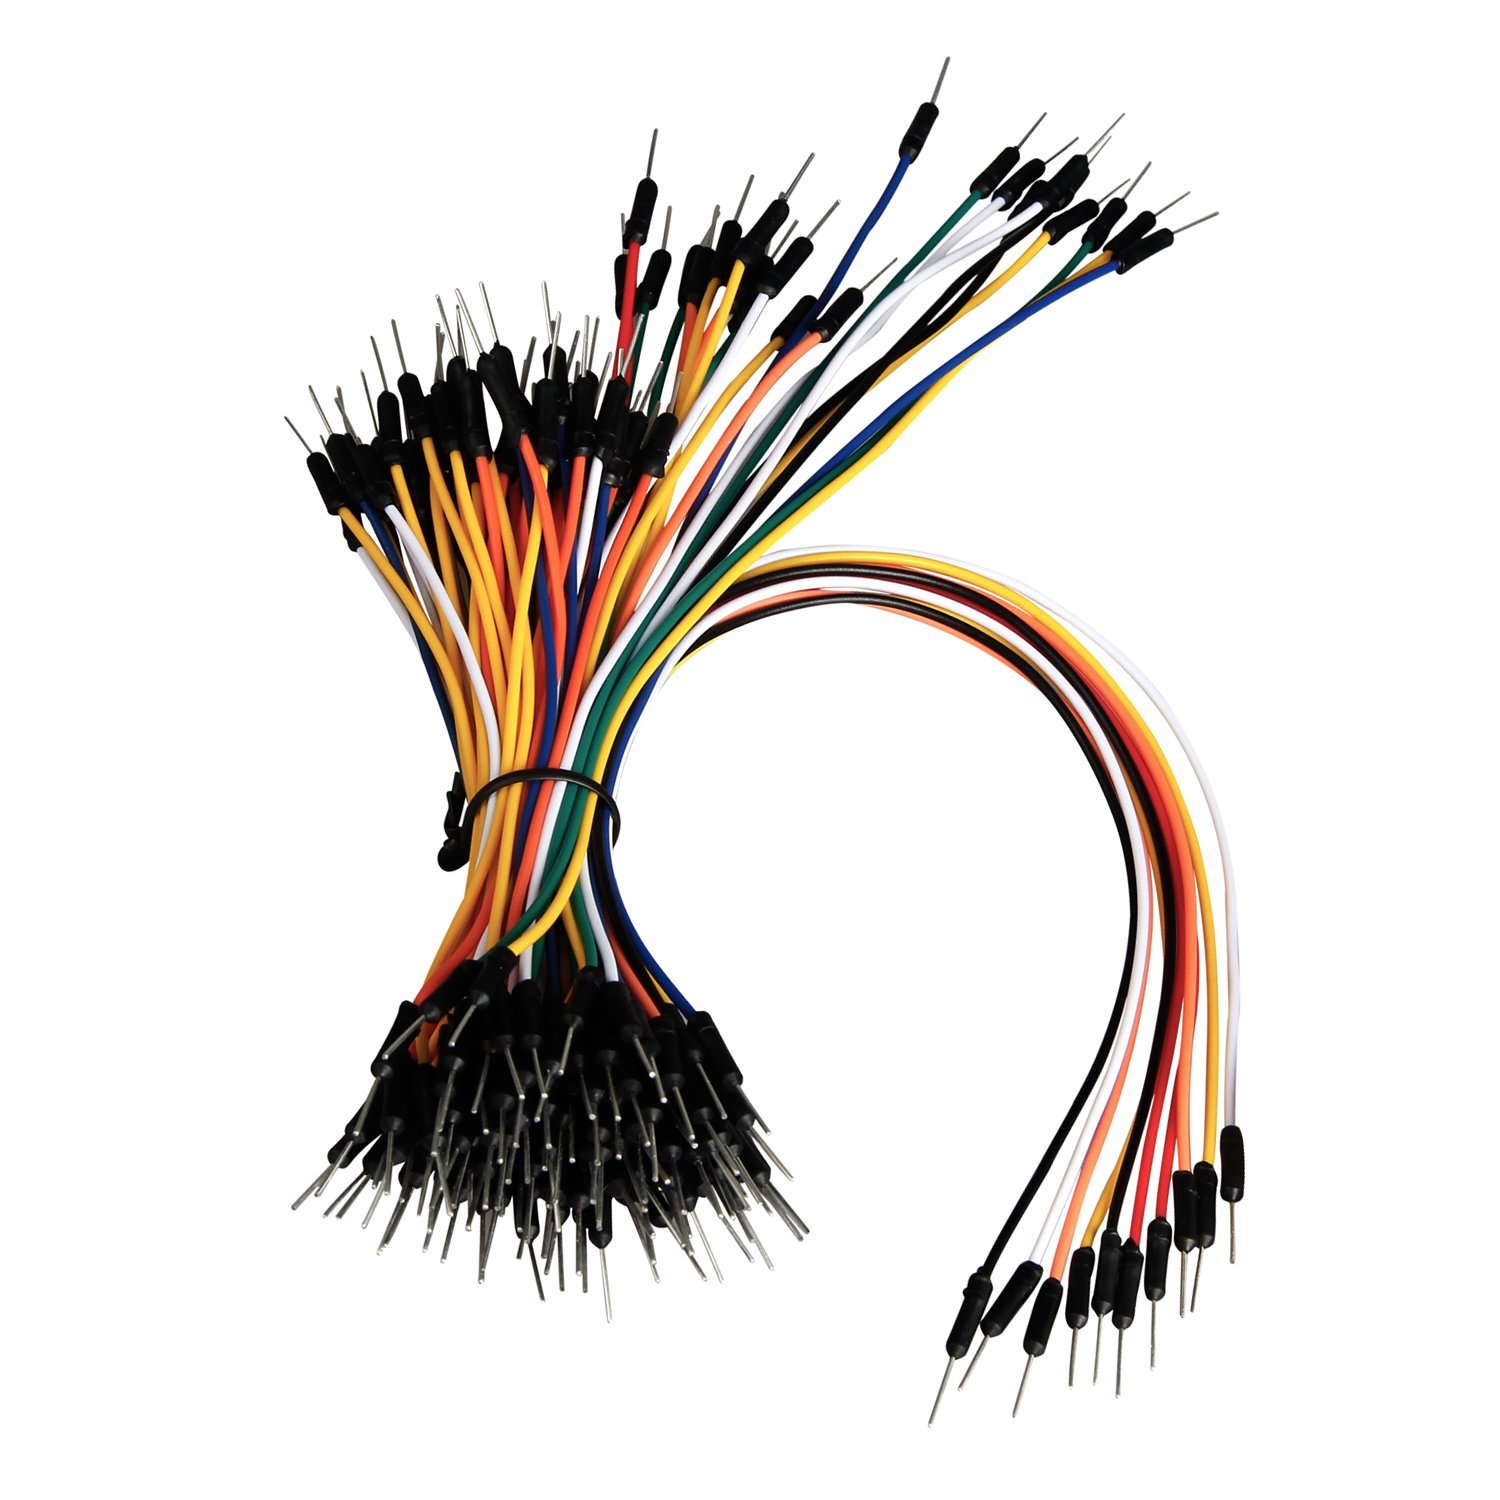 Breadboard Jumper Wires Experimental Dupont Cable Solderless Flexible Male To Male Bare Copper Wire Plastic External Largest Diameter 4mm от DHgate WW